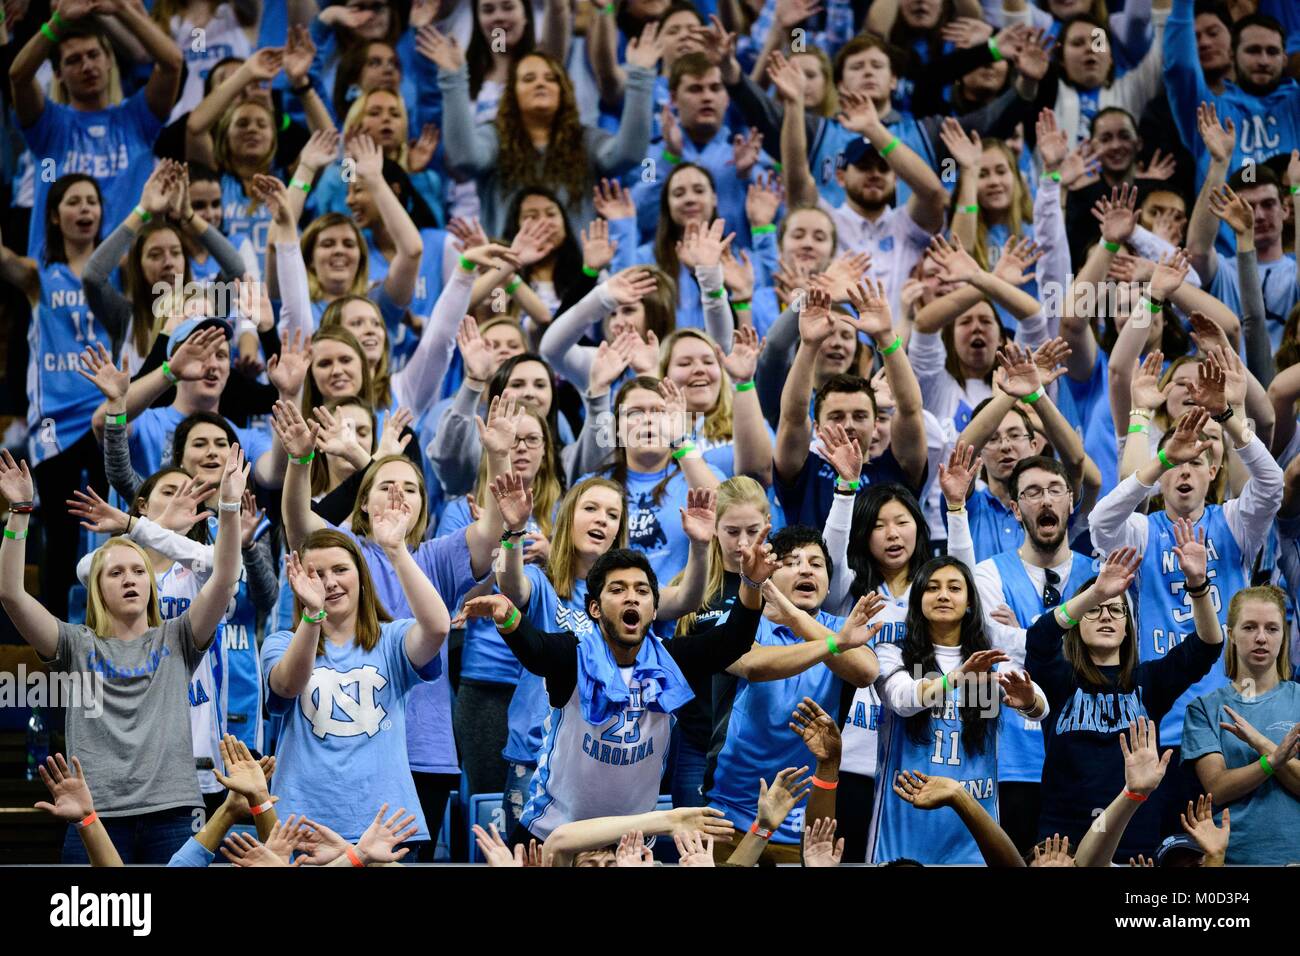 North Carolina, USA. 20th Jan, 2018. The North Carolina students section during a free throw shot during the NCAA College Basketball game between the Georgia Tech Yellow Jackets and the North Carolina Tar Heels at the Dean E. Smith Center on January 20, 2018 in Chapel Hill, North Carolina. Jacob Kupferman/CSM Credit: Cal Sport Media/Alamy Live News Stock Photo